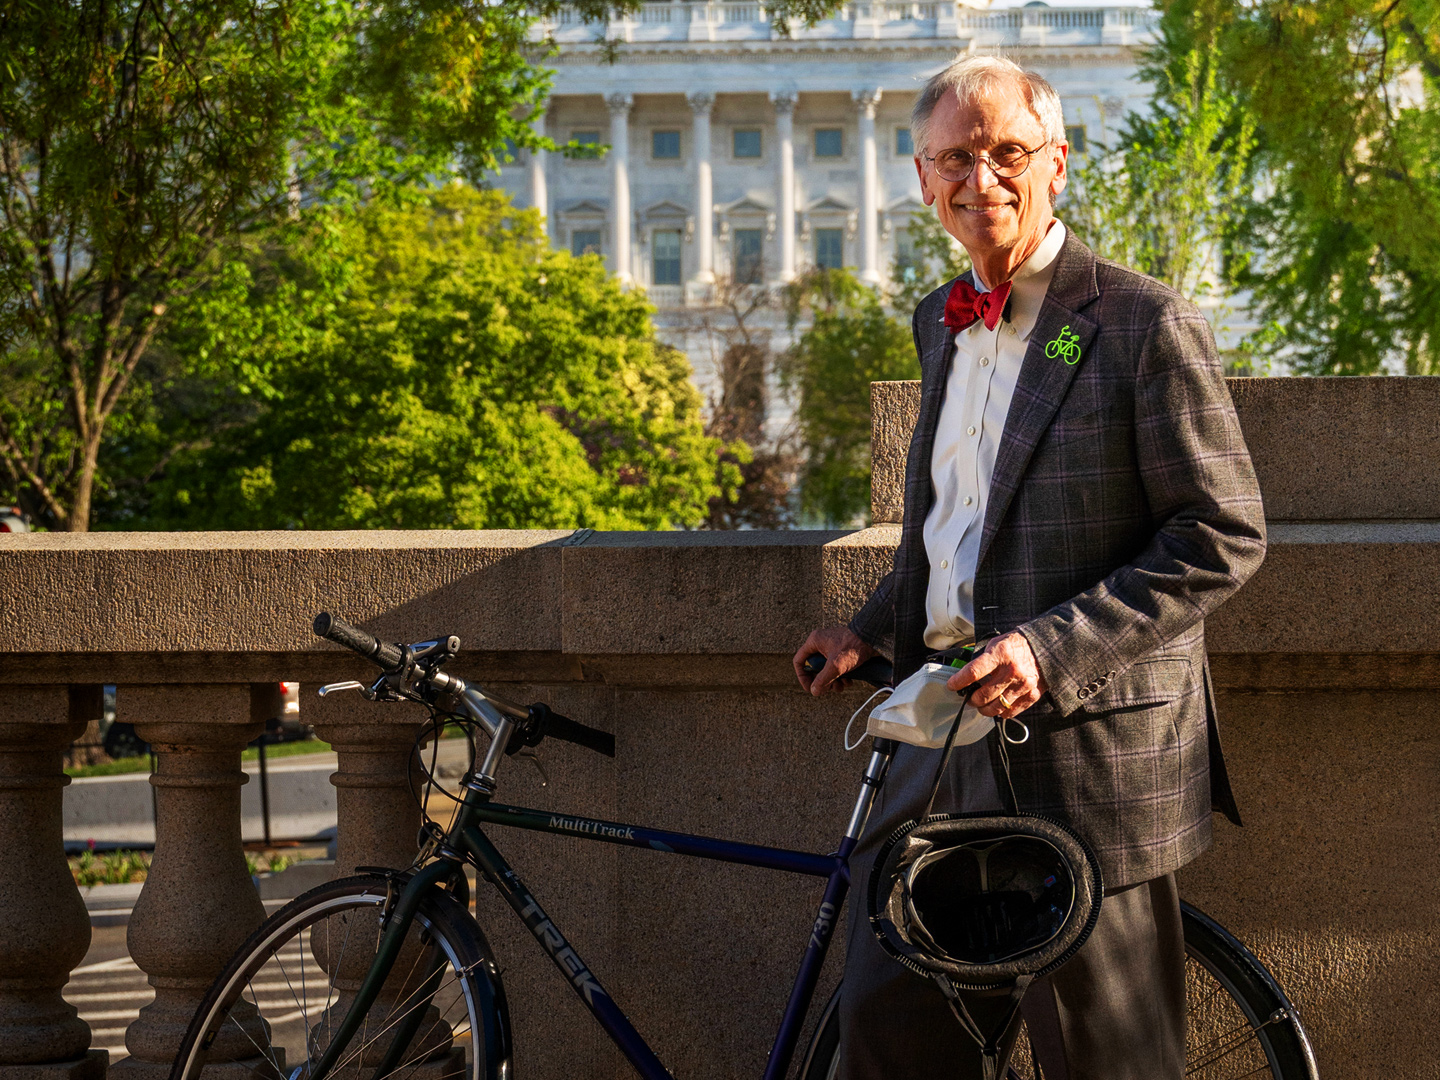 Earl Blumenauer stands holding his bicycle. In the background are trees and the White House.